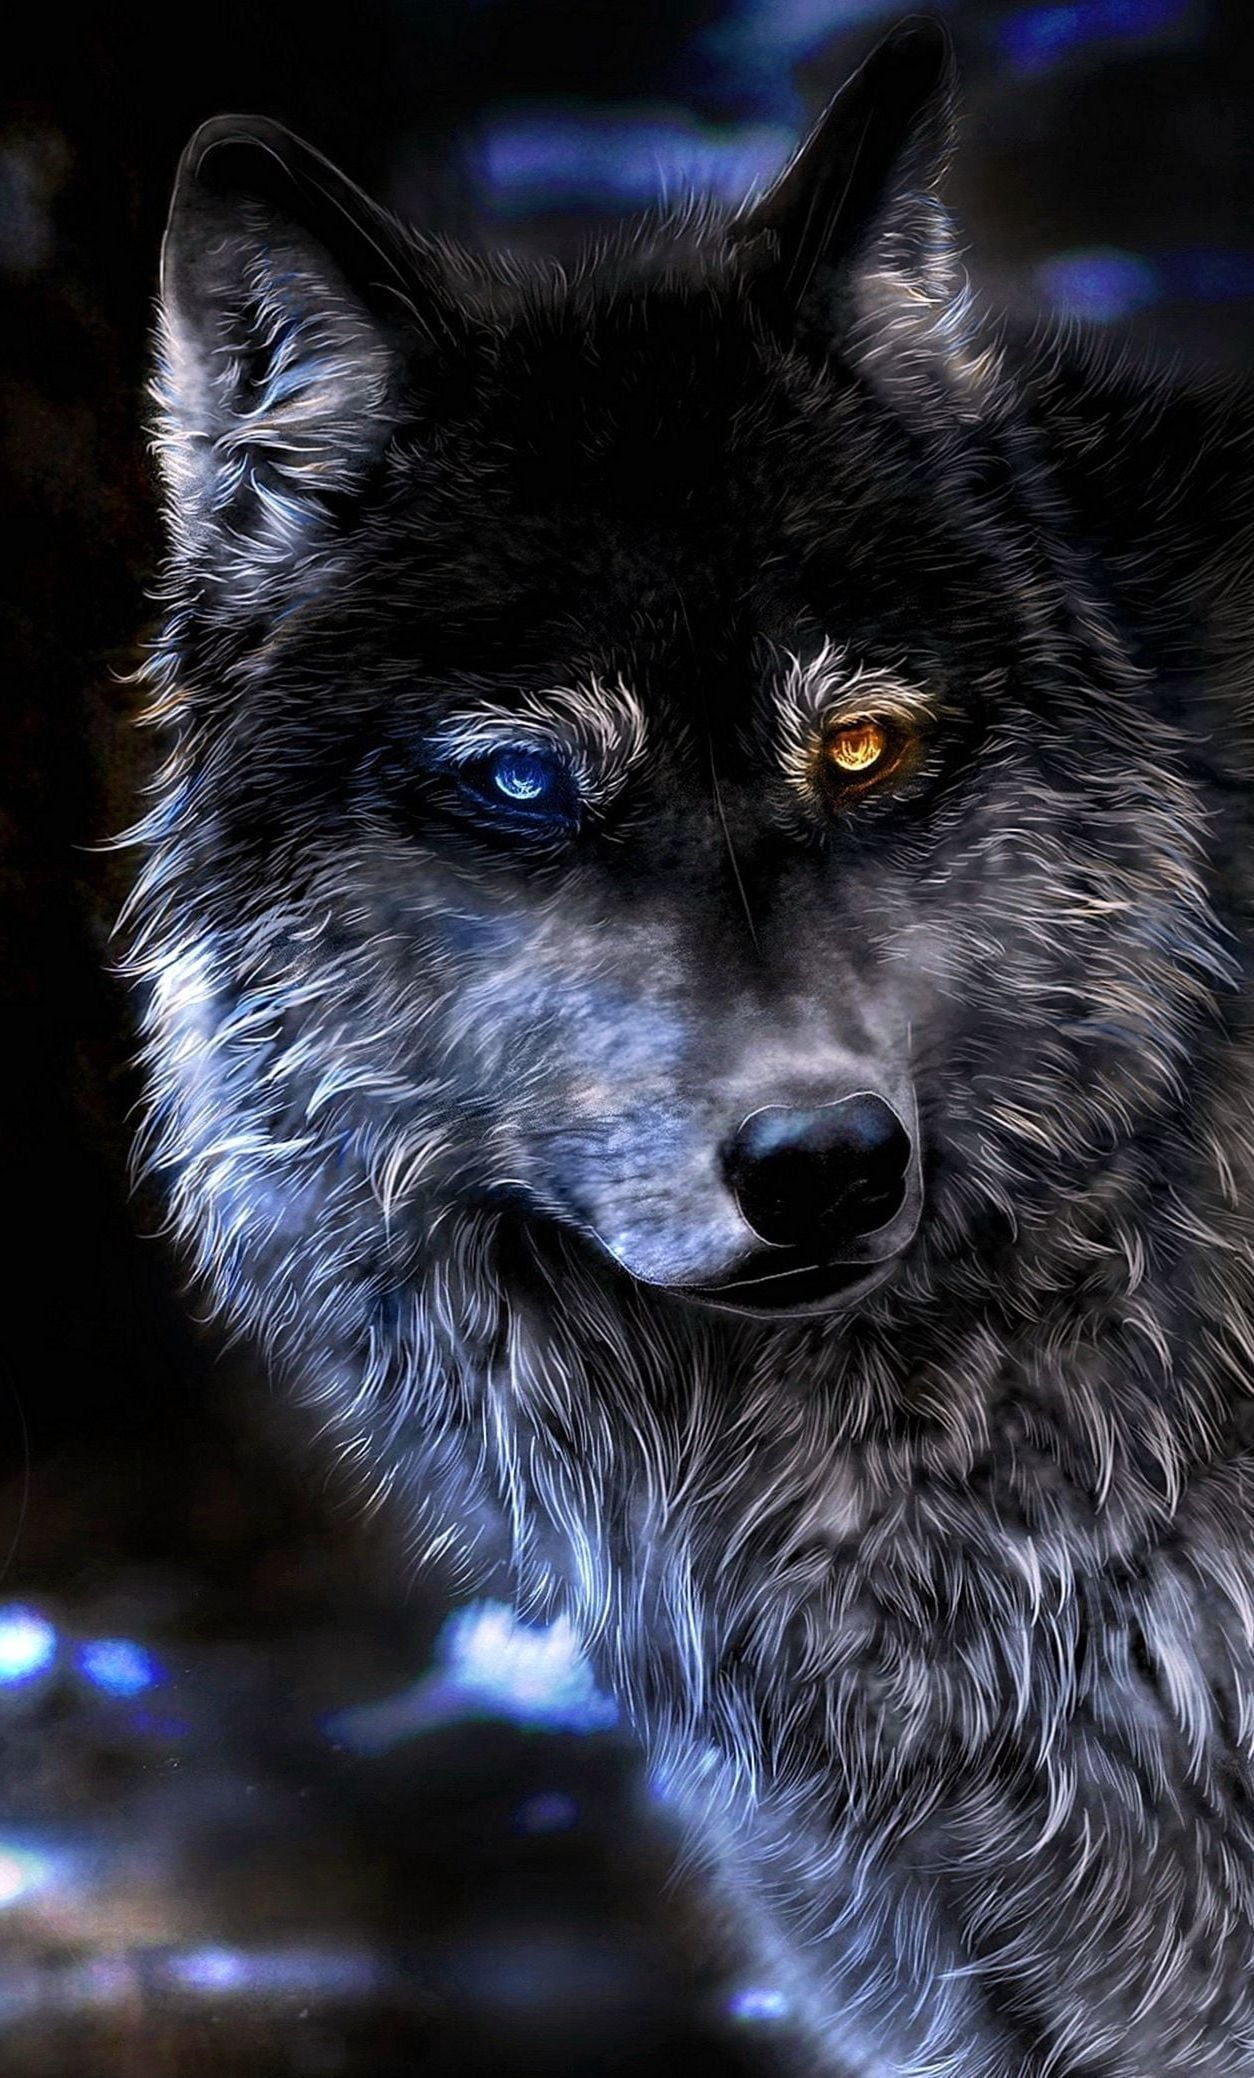 1254x2078 Angry Wolf Wallpapers 4K iPhone #Angry #Wolf #Wallpapers #4K #iPhone | Iphone wallpaper wolf, Wolf wallpaper, Angry wolf